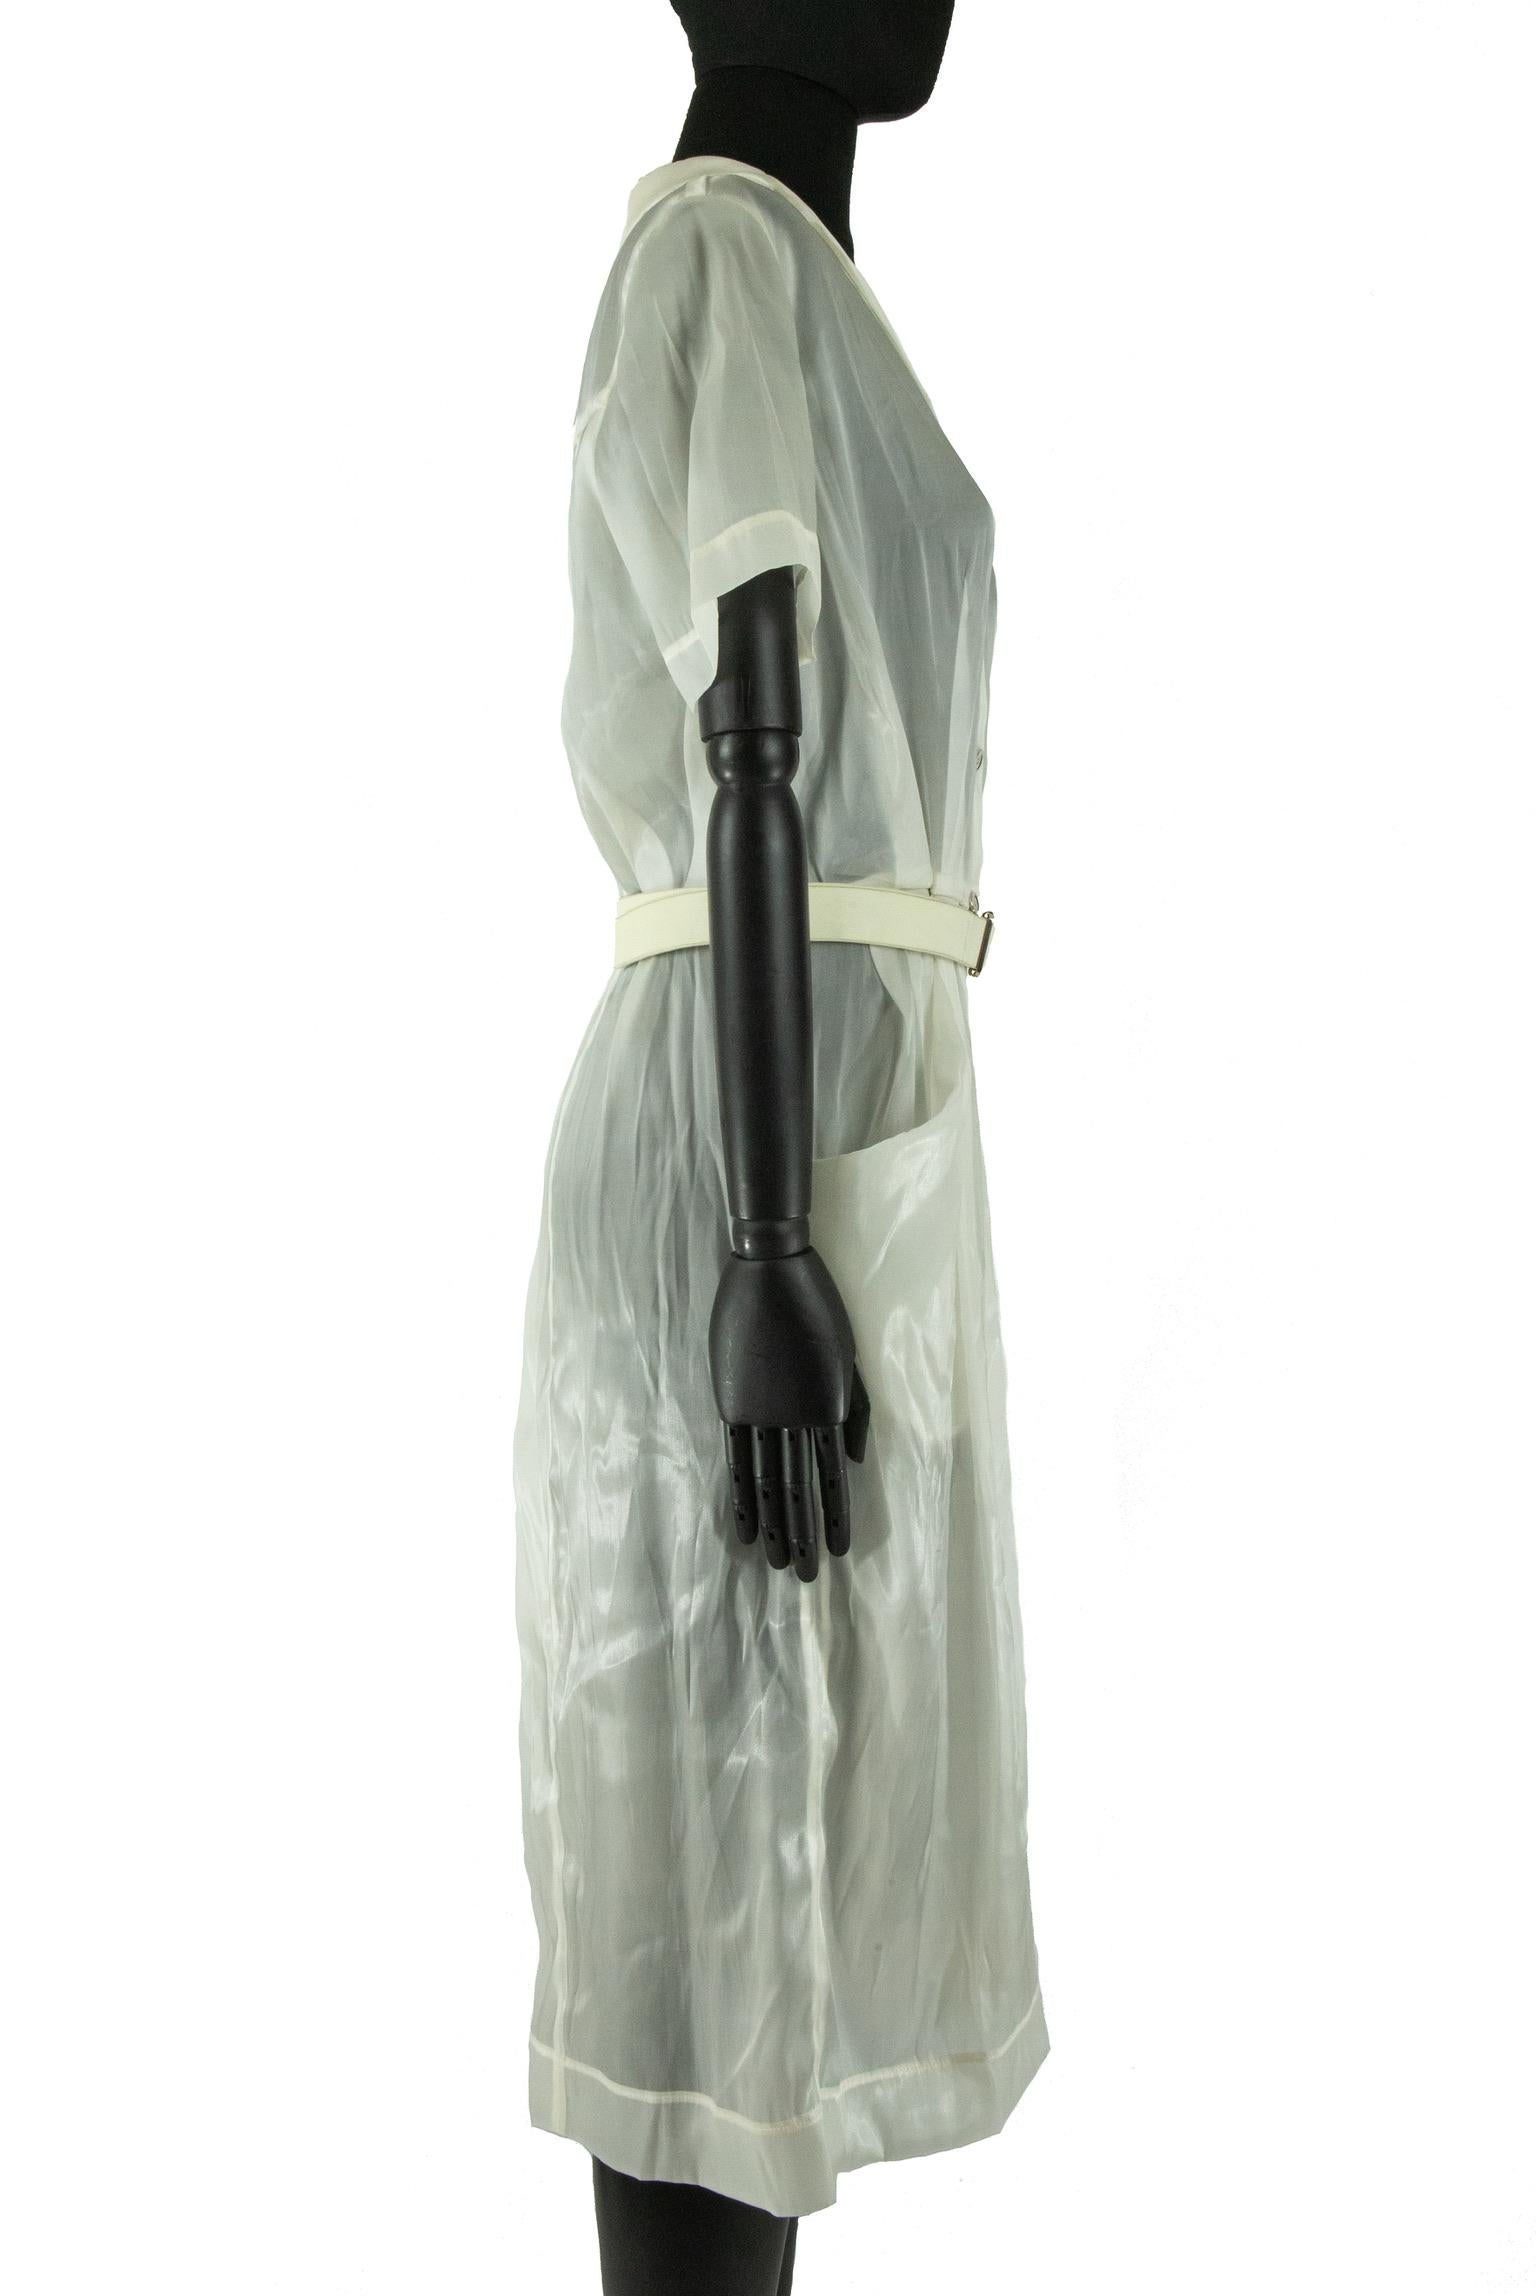 This Marc Jacob for Louis Vuitton shirt dress was featured in the 2008 spring ready to wear collection. Described as a ‘chic take on the classic nurses uniform’, models wore the sheer organza dresses over garments with matching sheer monogram LV